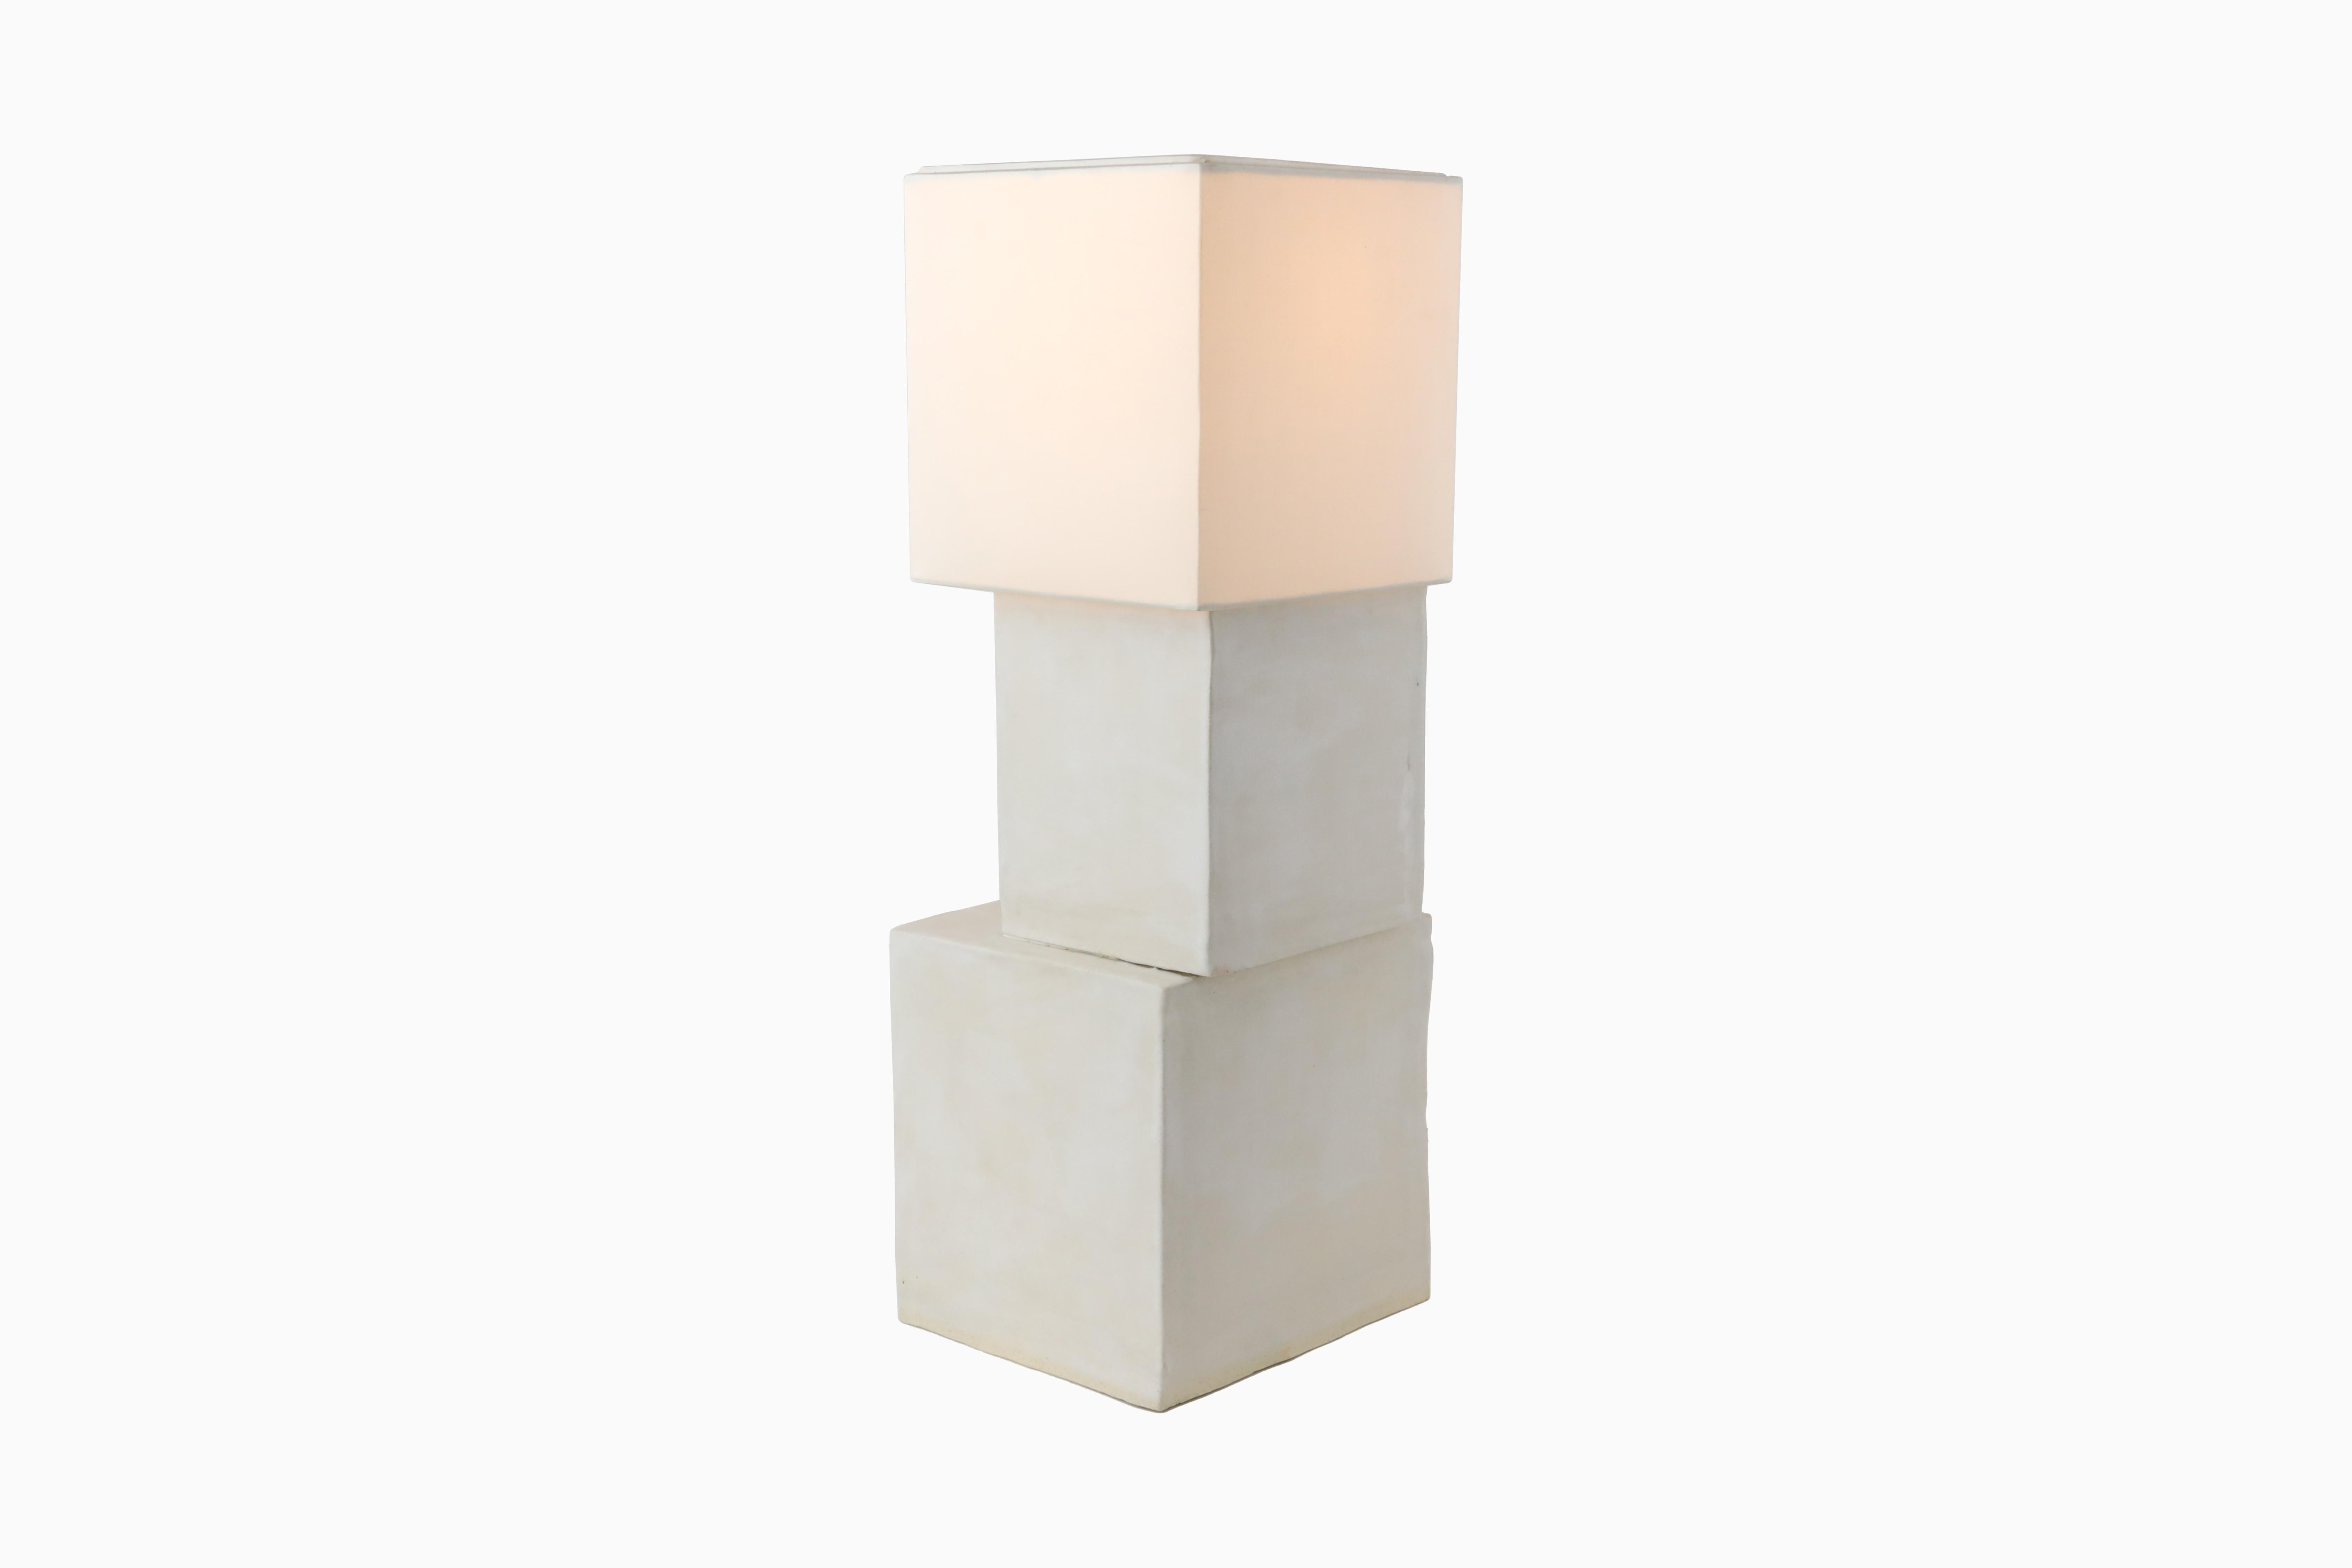 The Stacked Cube Lamp was inspired by the modern architecture of New York City. Each cube is made of white clay and finished in a matte white glaze. The cubes are assembled off-center but find balance in their final form. The ceramic cubes are